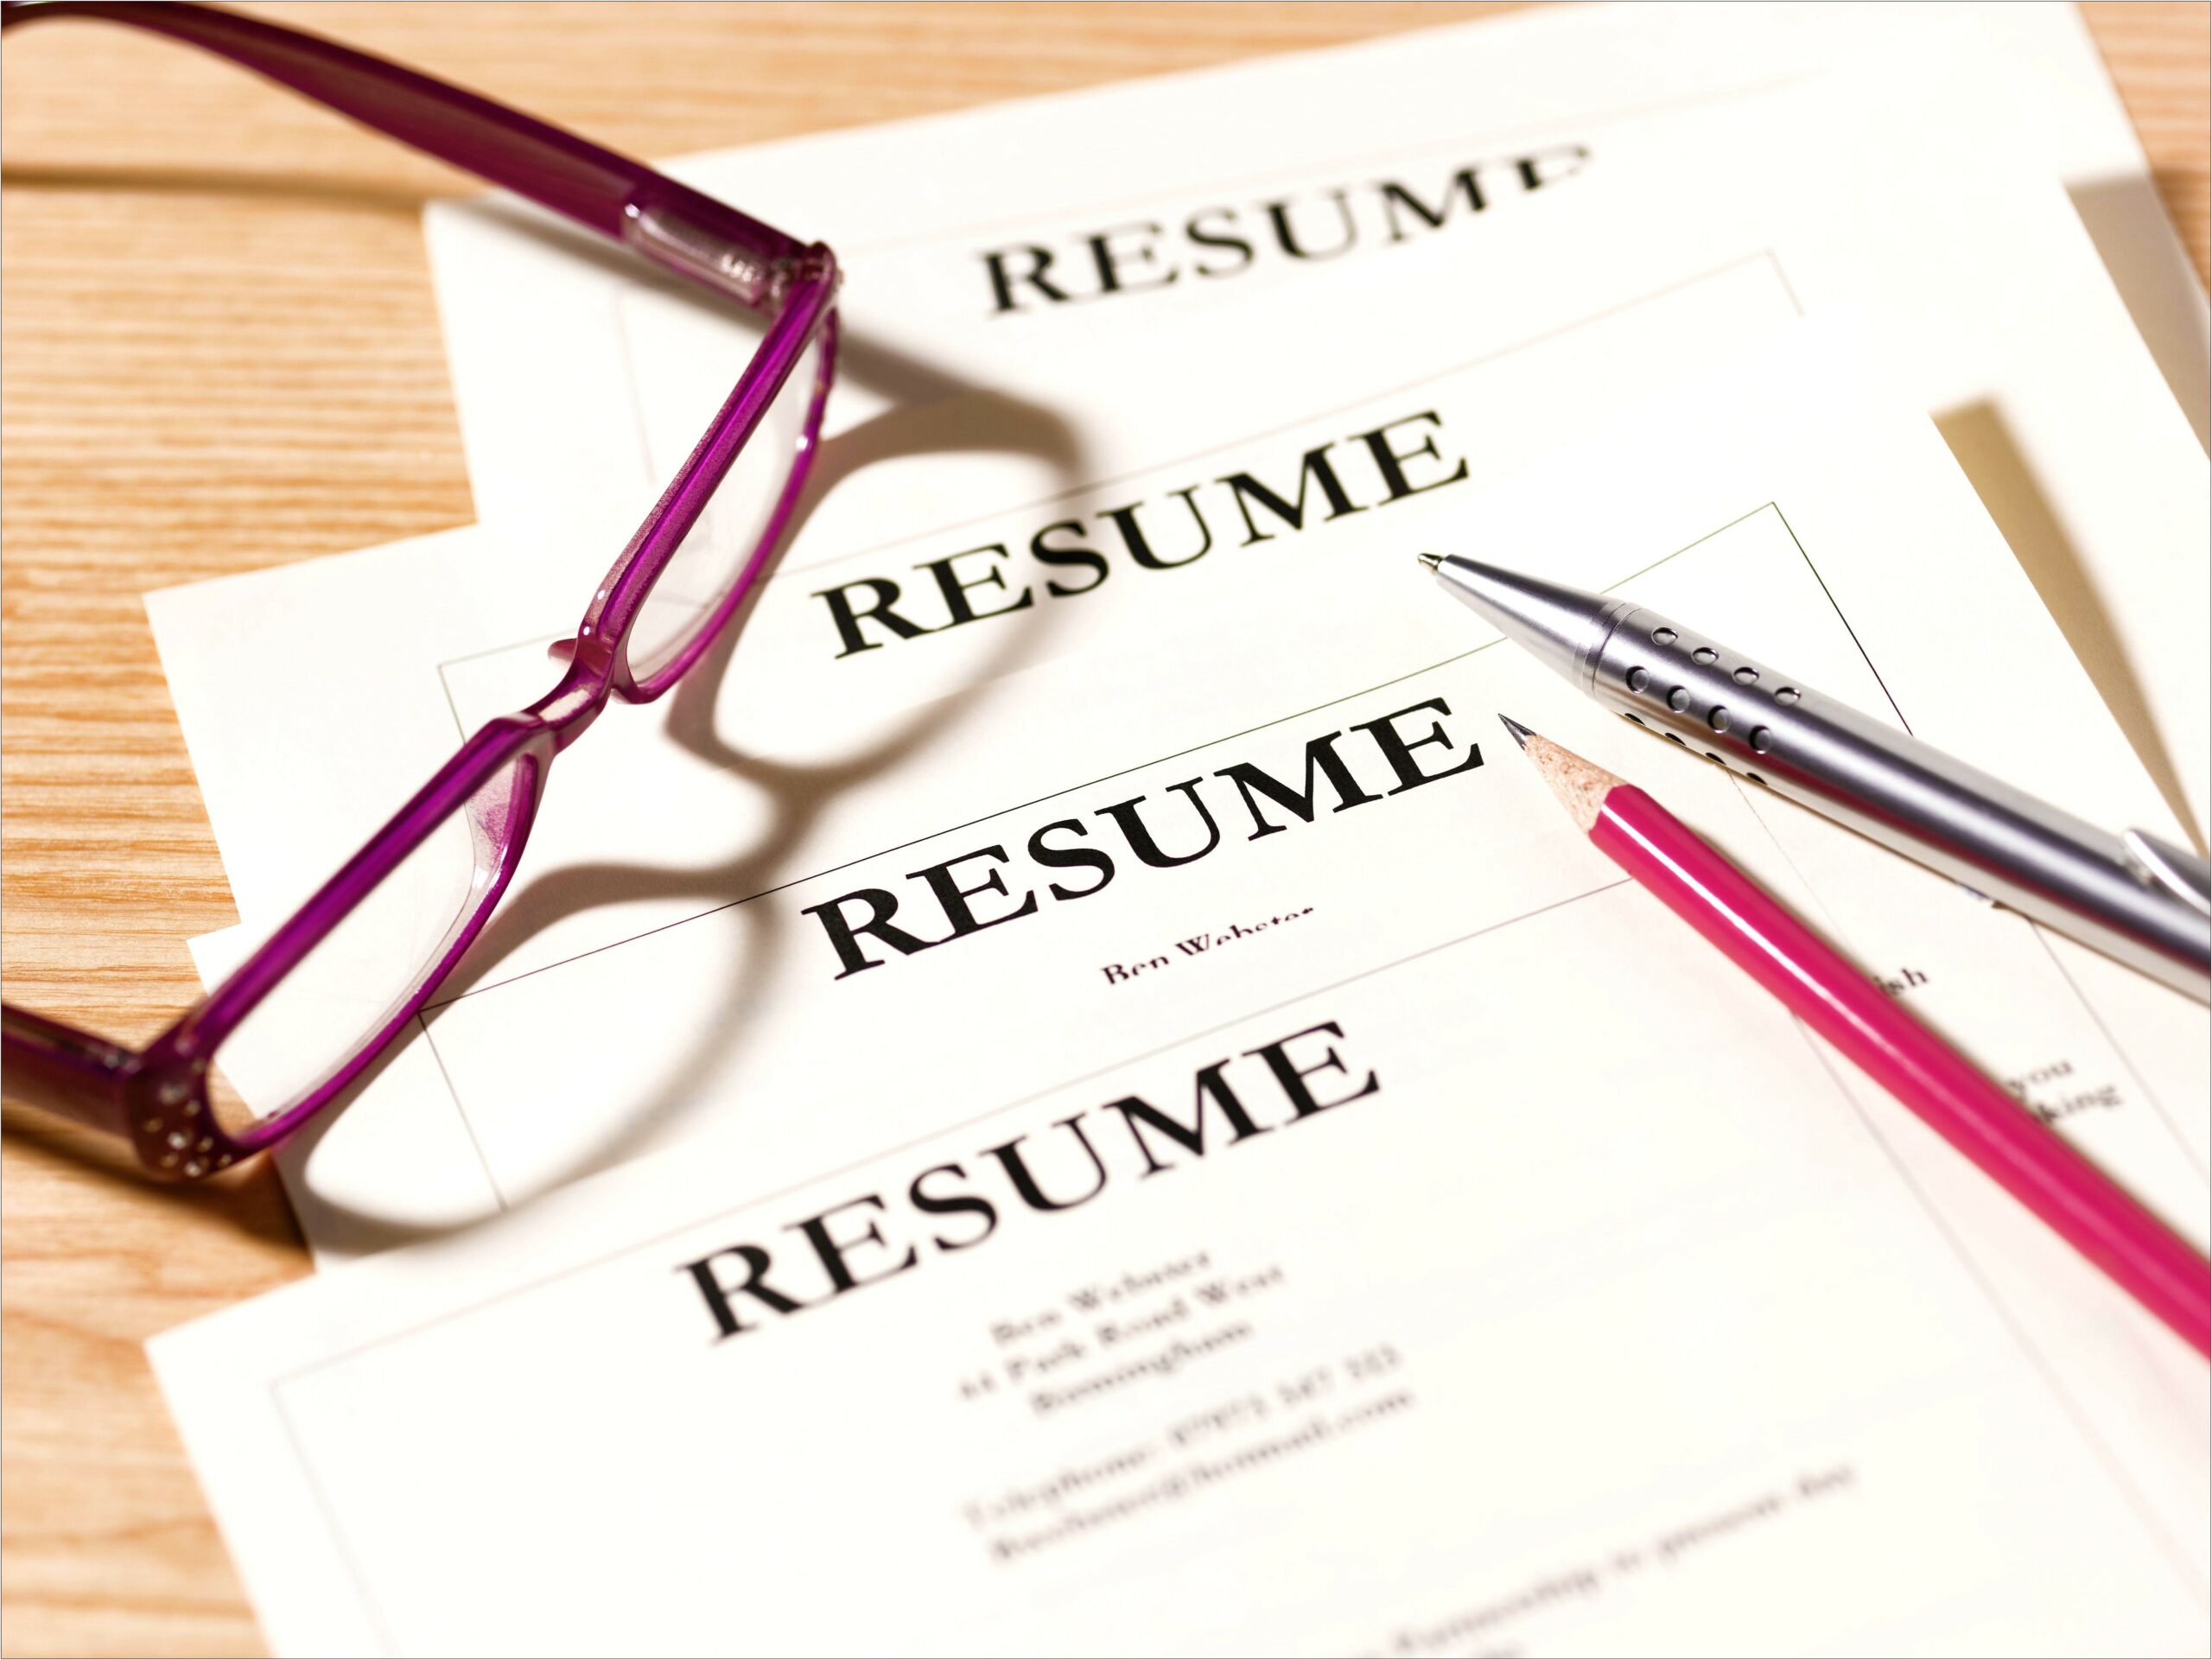 Resume Skills Hot Words And Phrases